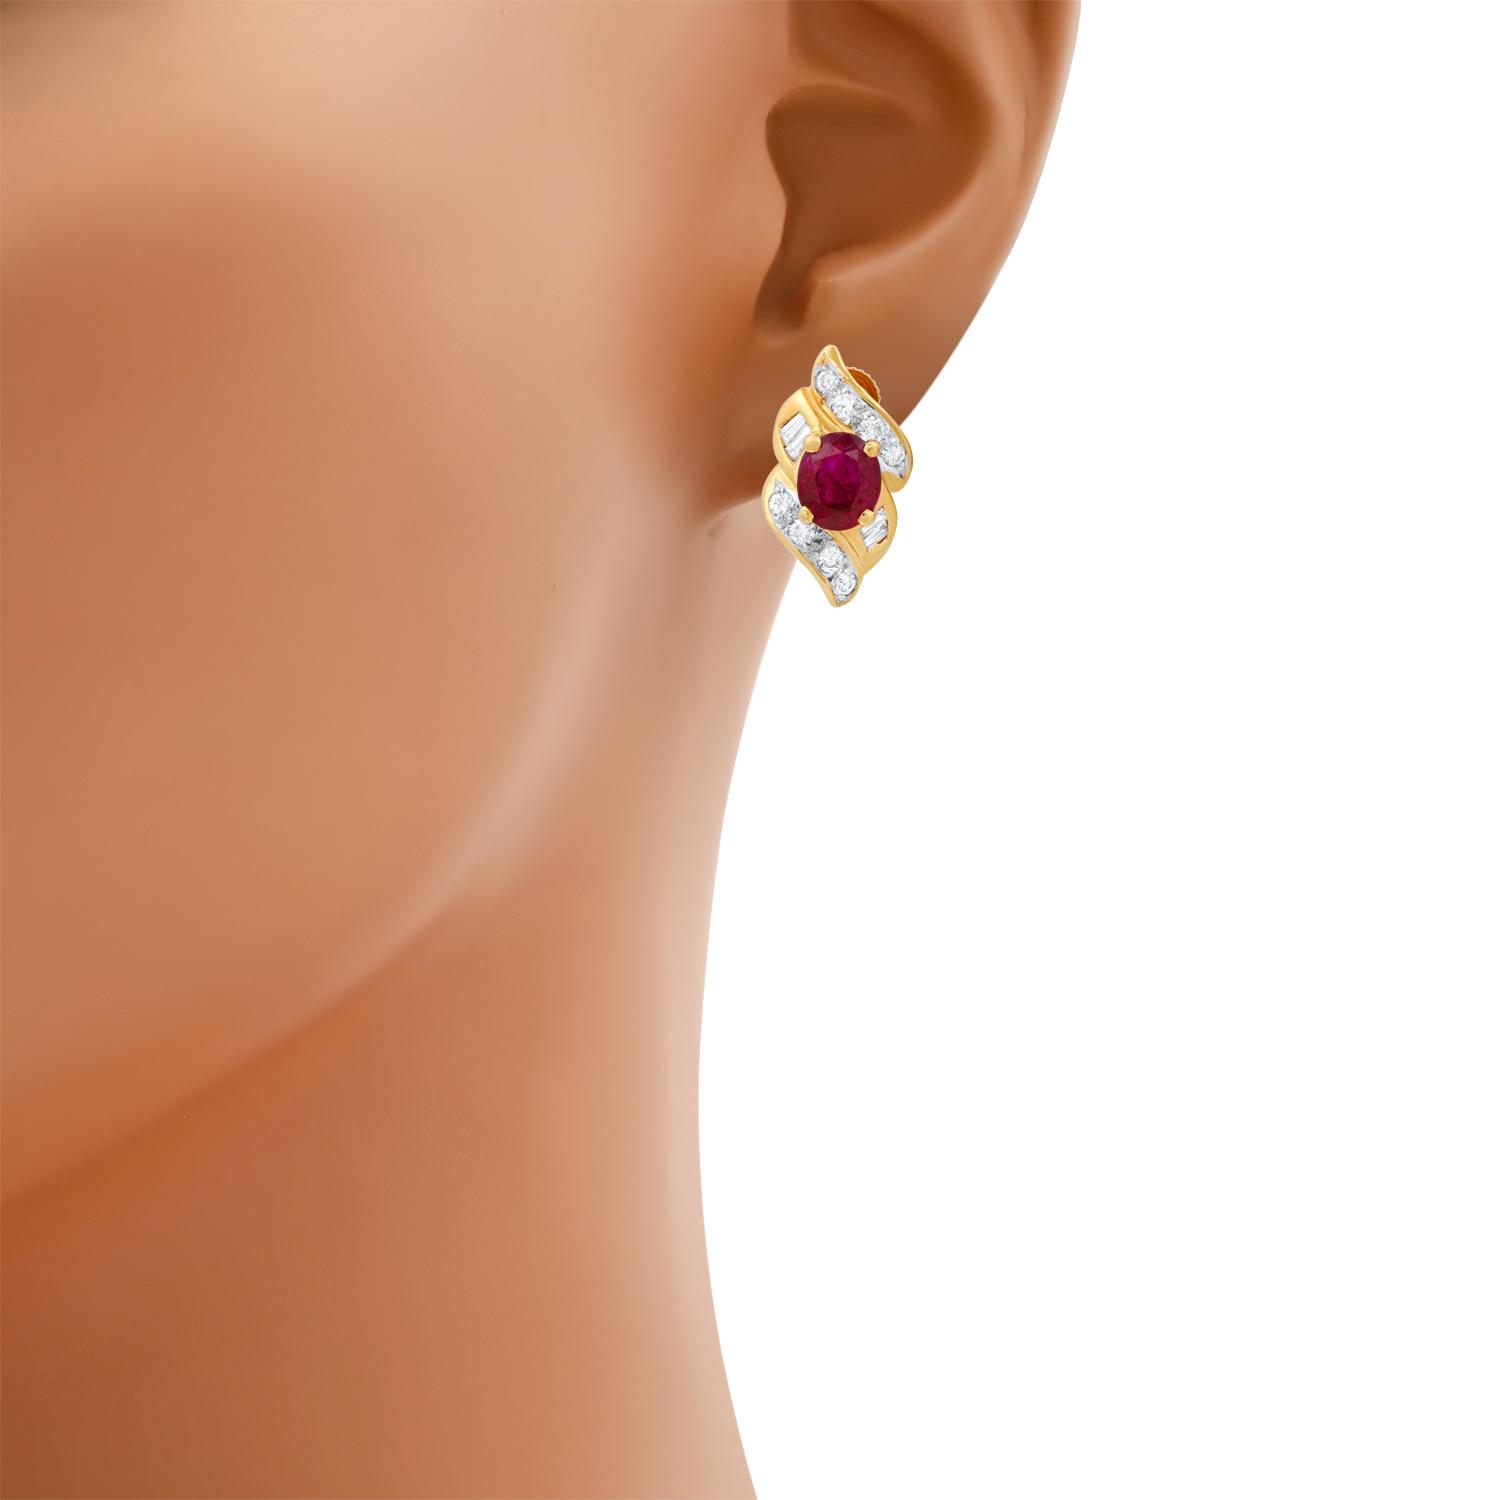 18K Yellow Gold Setting with 1.37ct Ruby and 0.56ct Diamond Earrings